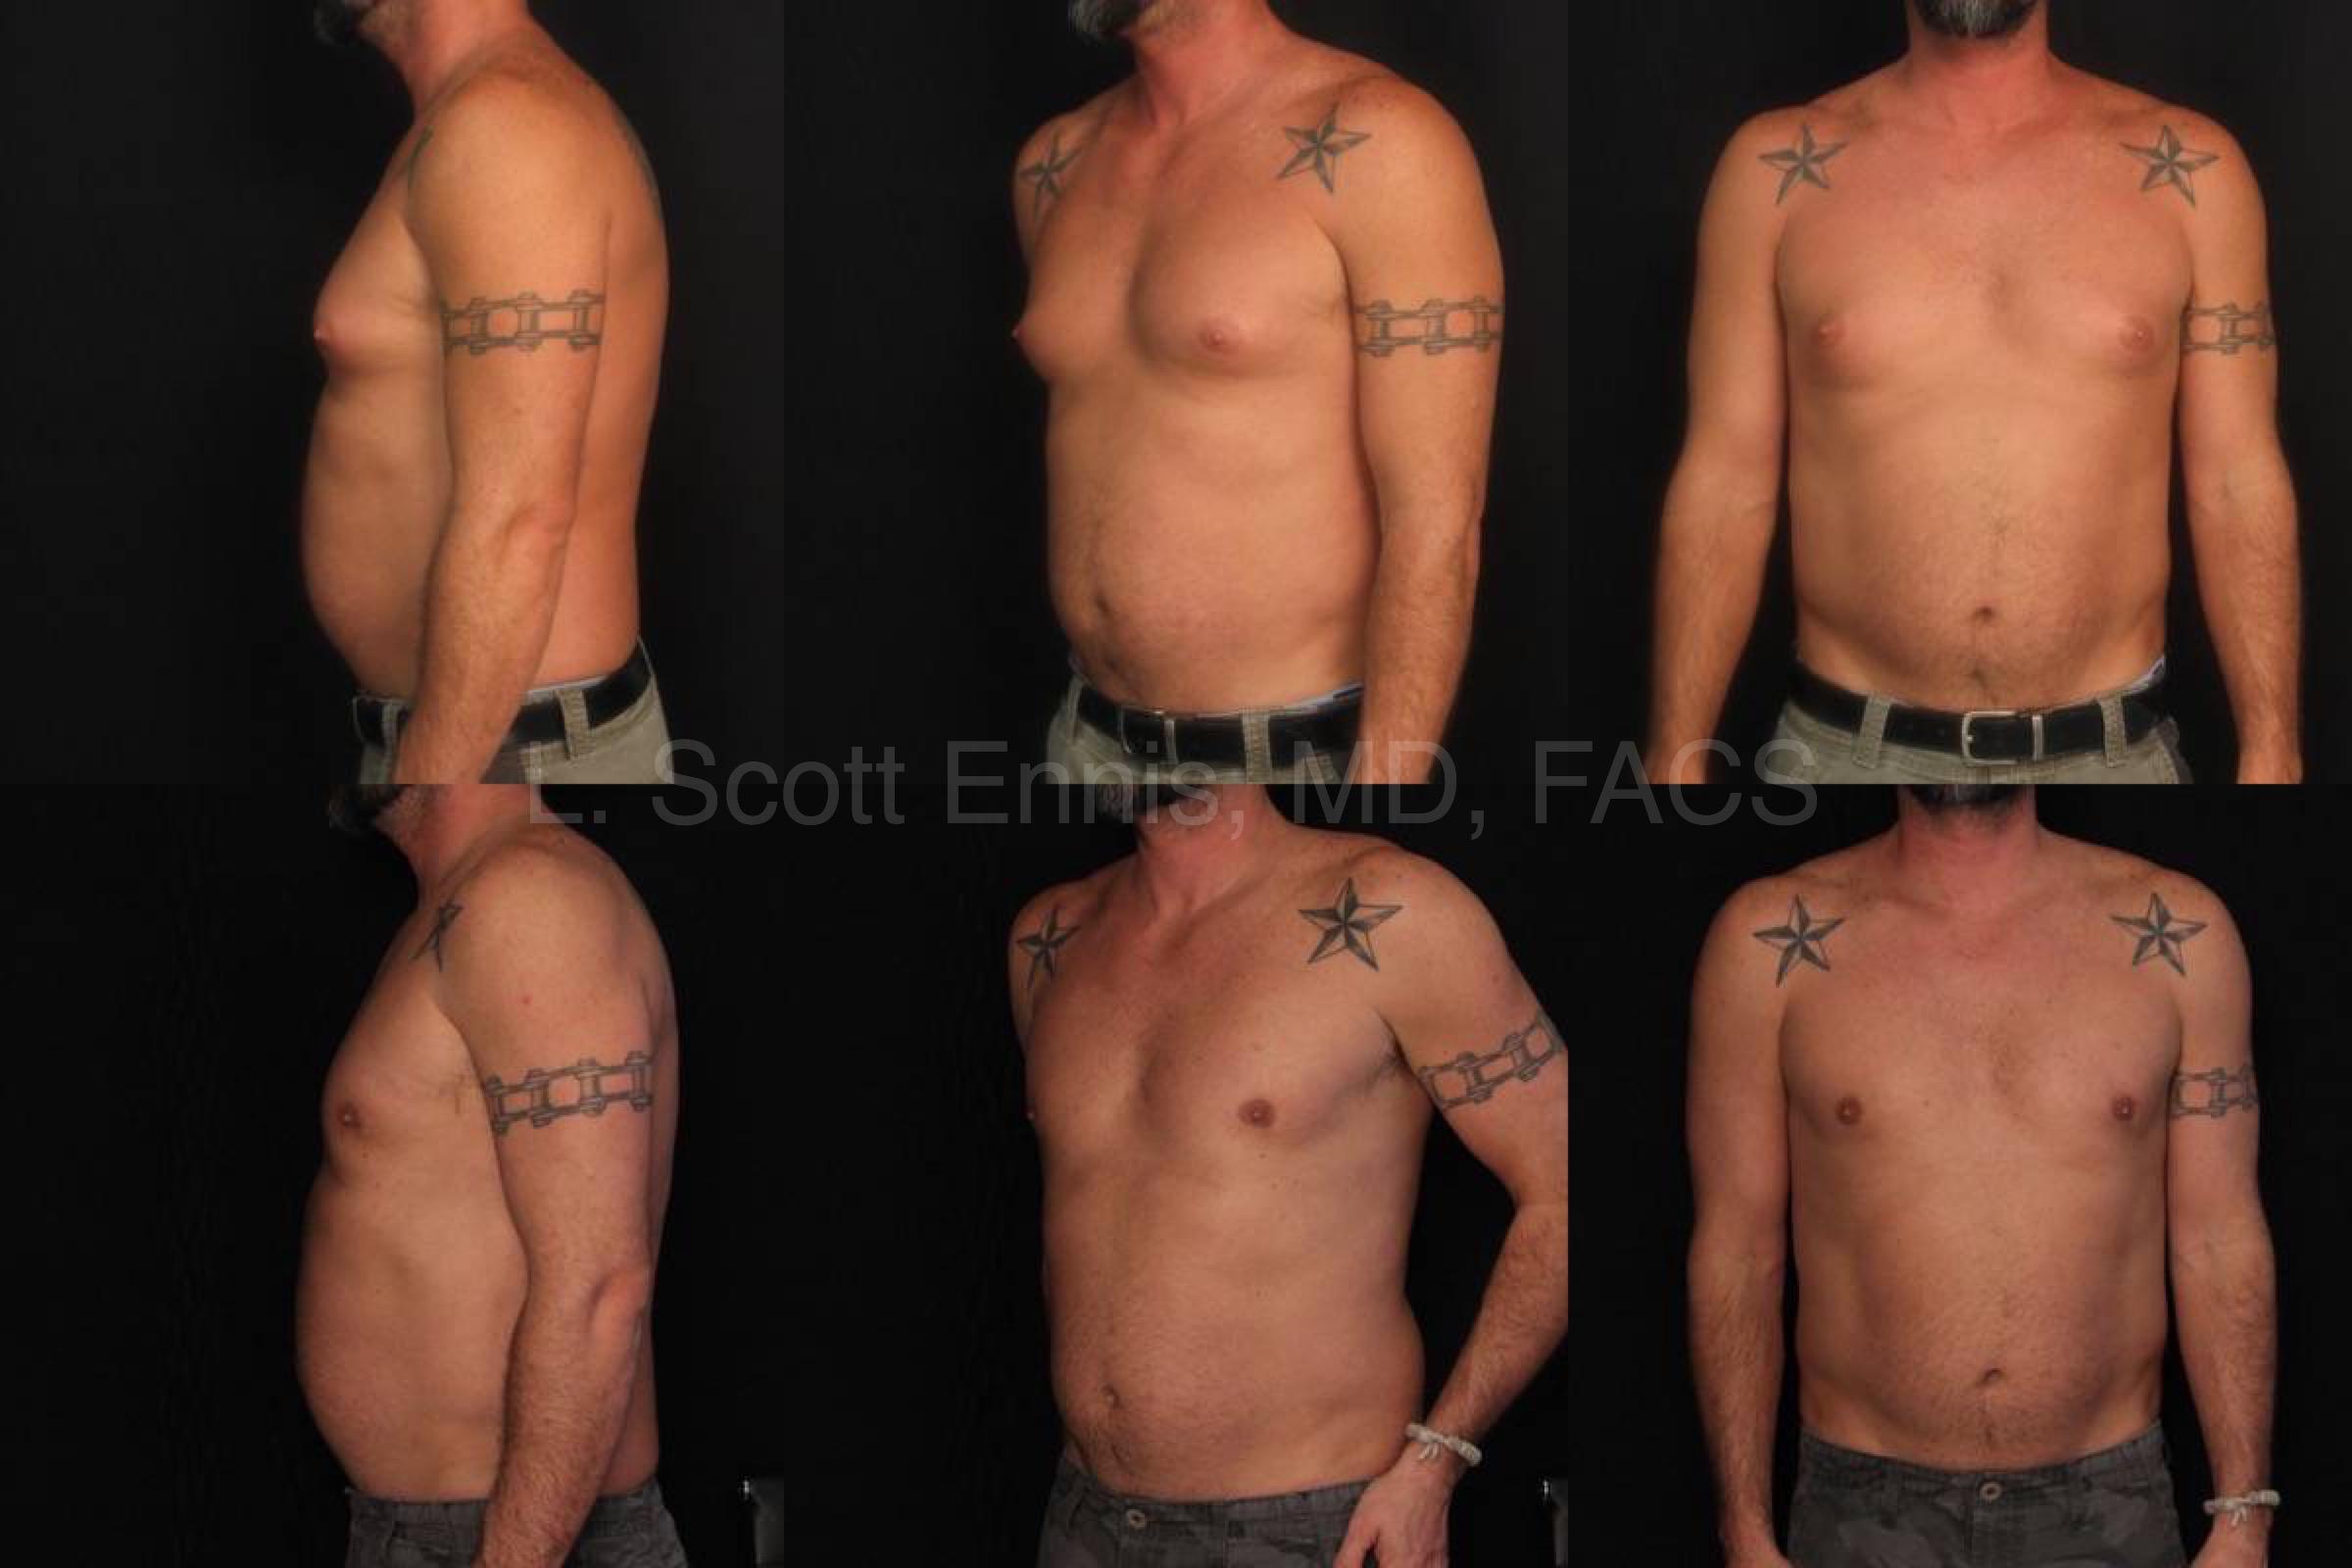 Gynecomastia Liposuction of Chest Before and After Ennis Plastic Surgery Palm Beach Boca Raton Destin Miami Fort Lauderdale